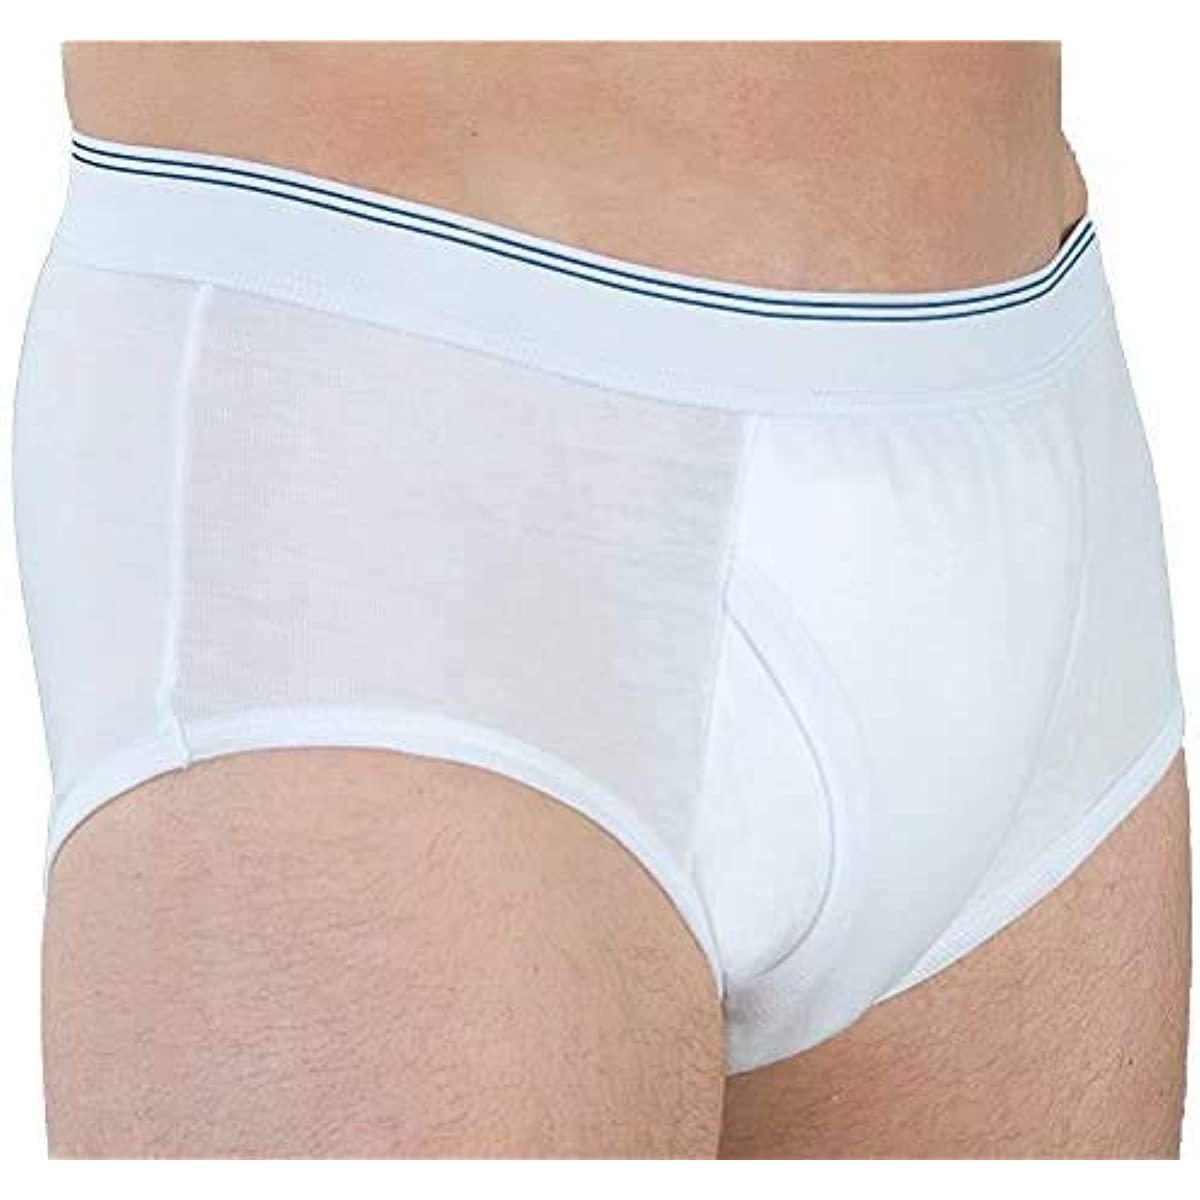 Washable Urinary Incontinence Cotton Boxer Underwear for Men with